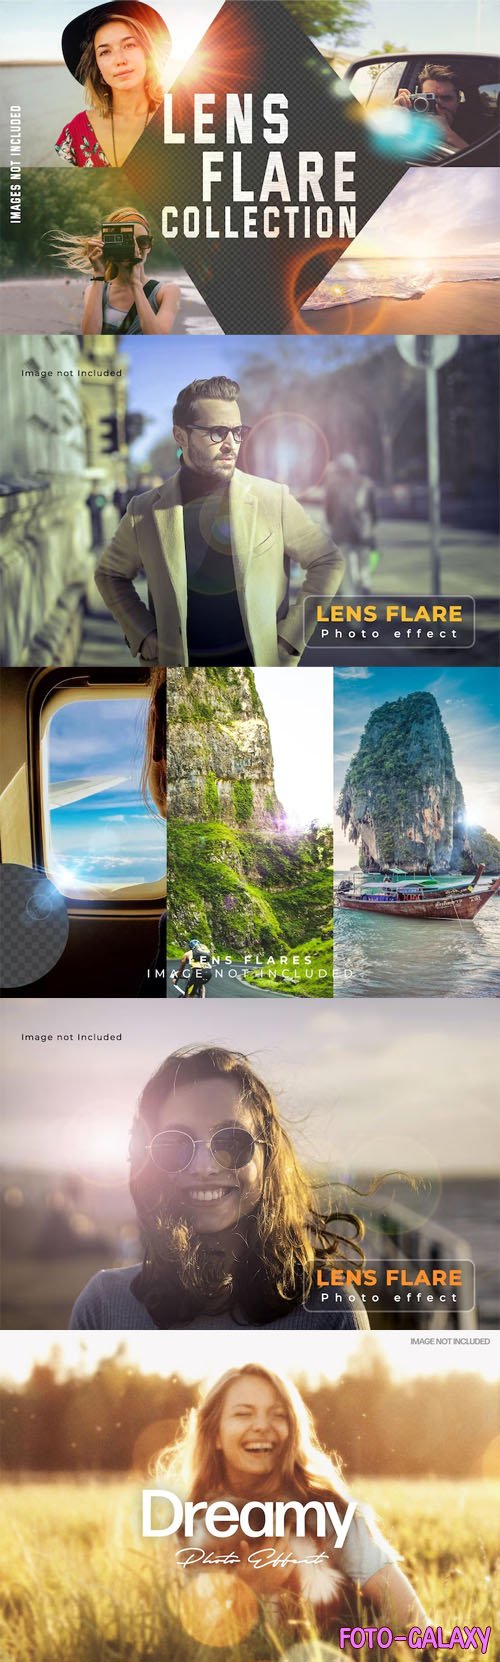 Lens Flare Photo Effects - Premium Collection for Photoshop